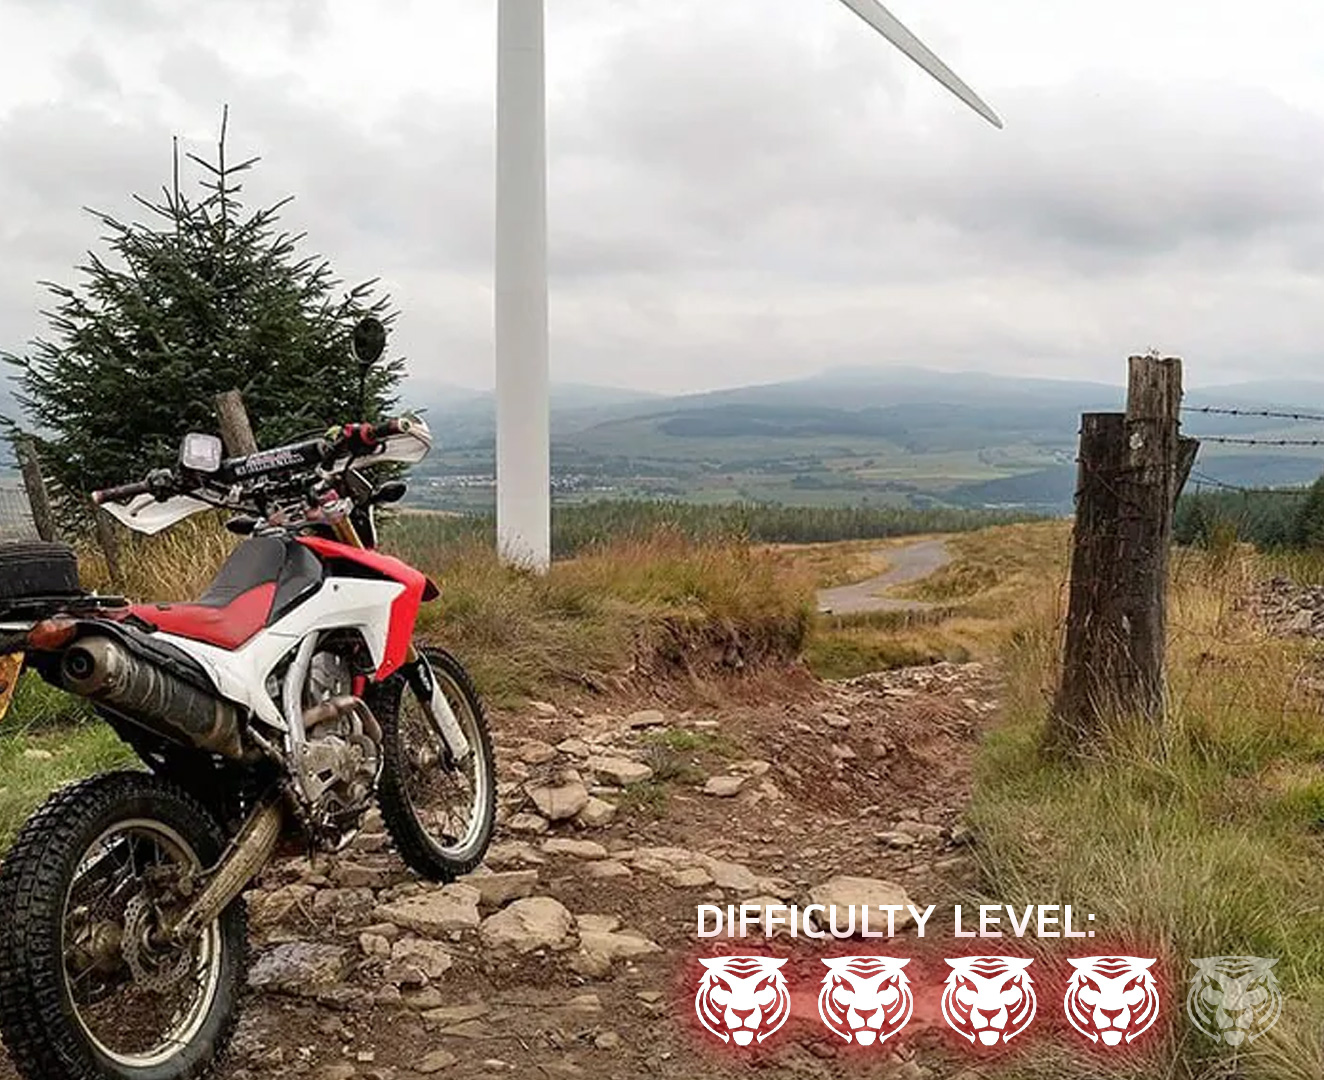 The Tiger 1200 - Rider Routes - Sarn Helen South Wales